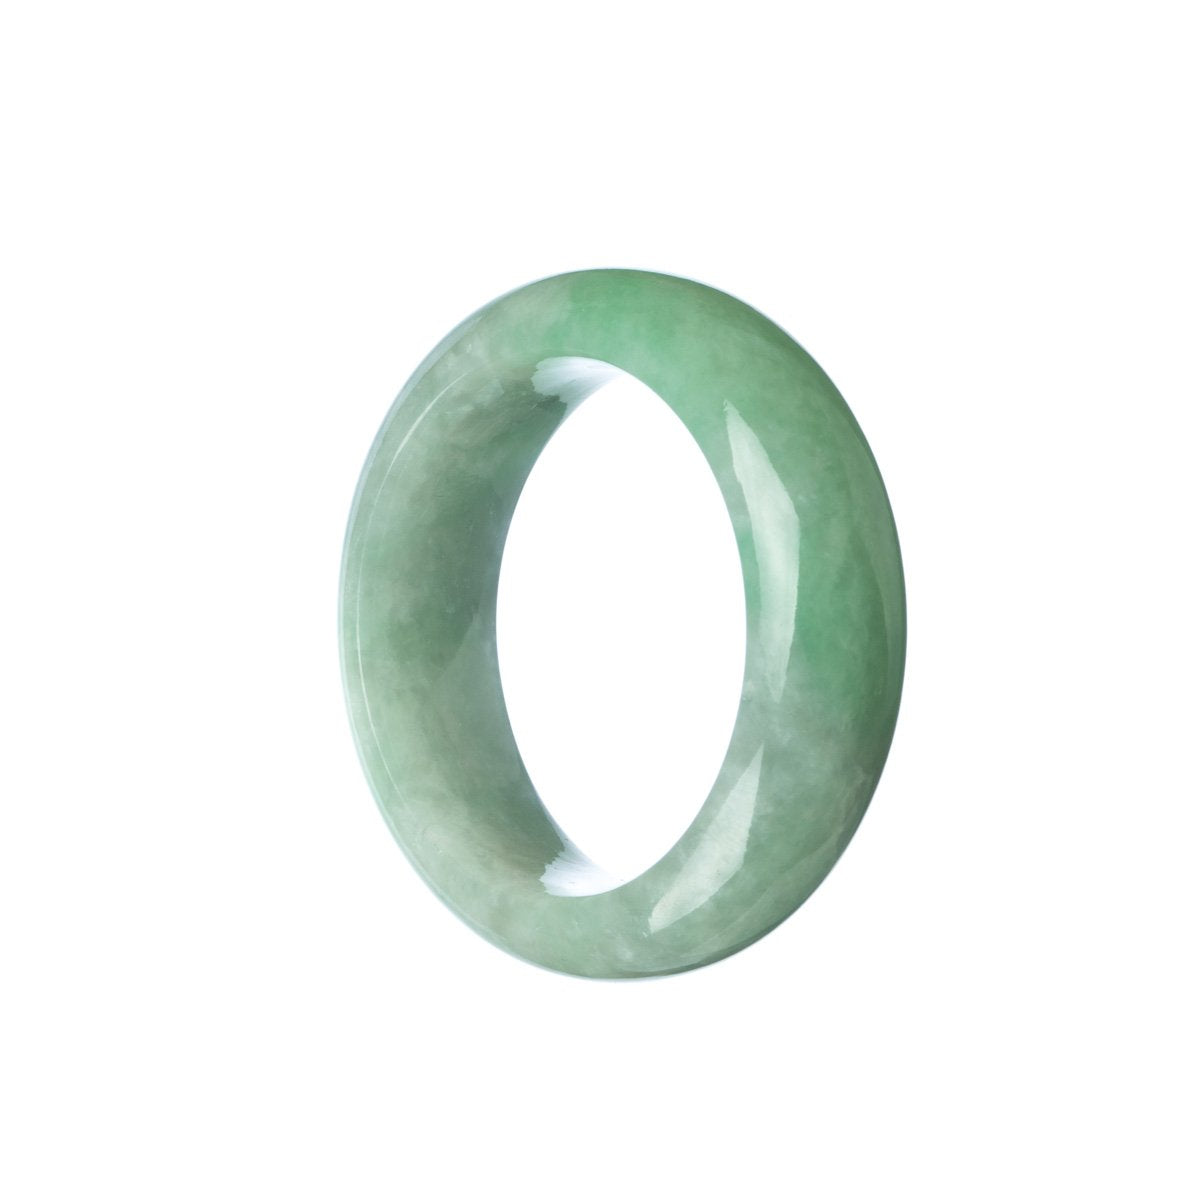 A half-moon shaped, child-sized genuine Type A Green Jade bangle by MAYS™.